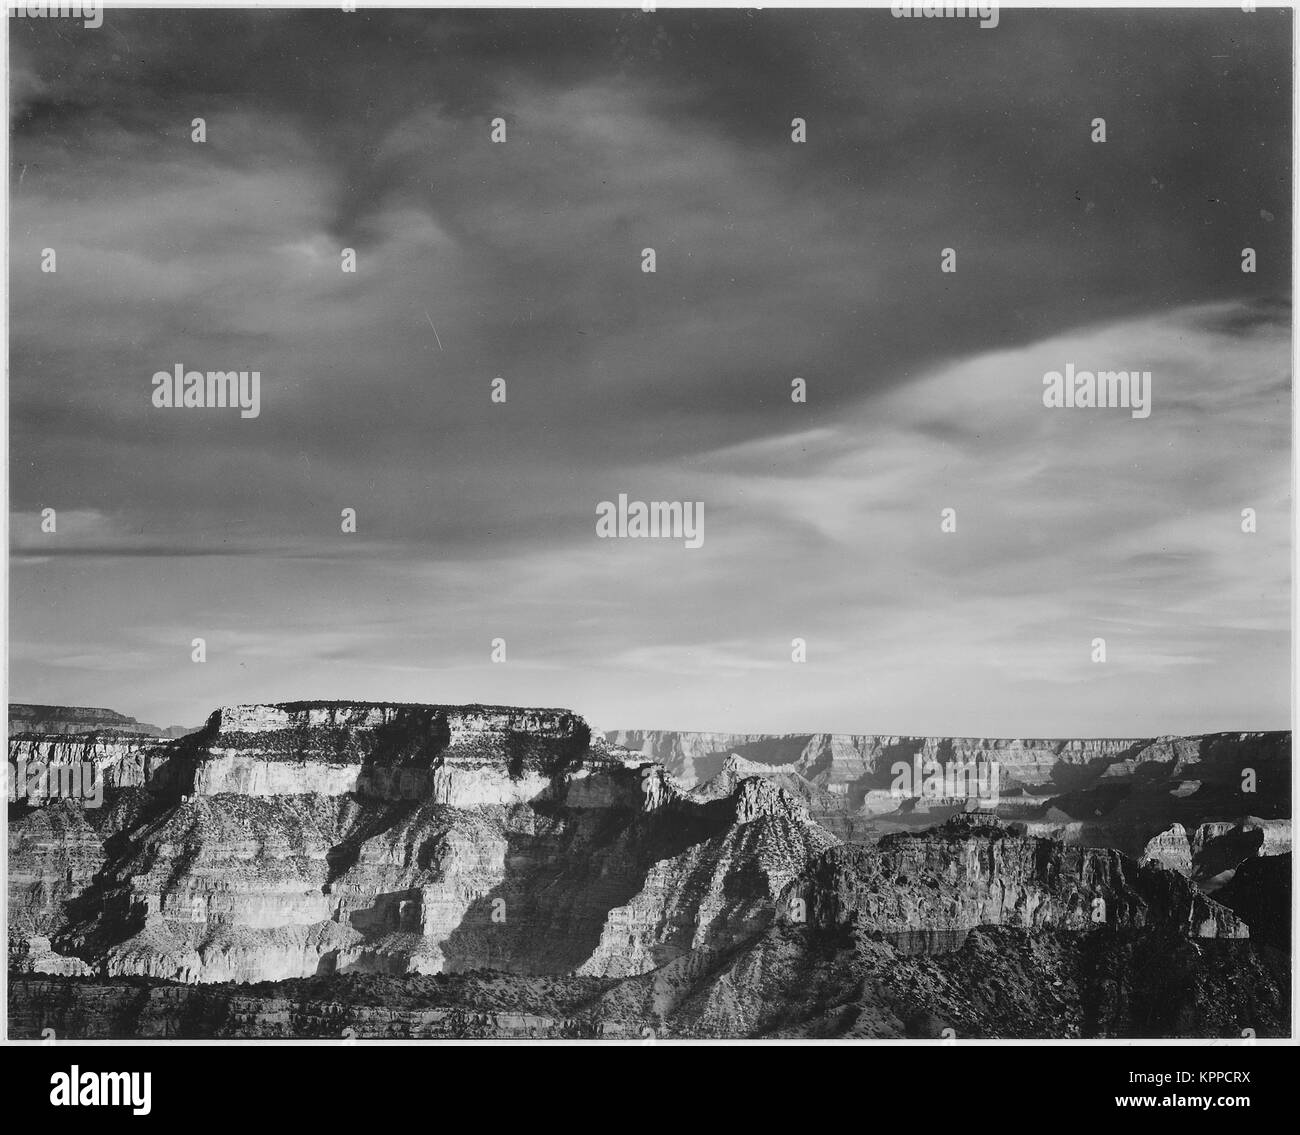 View from the North Rim 'Grand Canyon National Park' Arizona. 1933 - 1942 Stock Photo